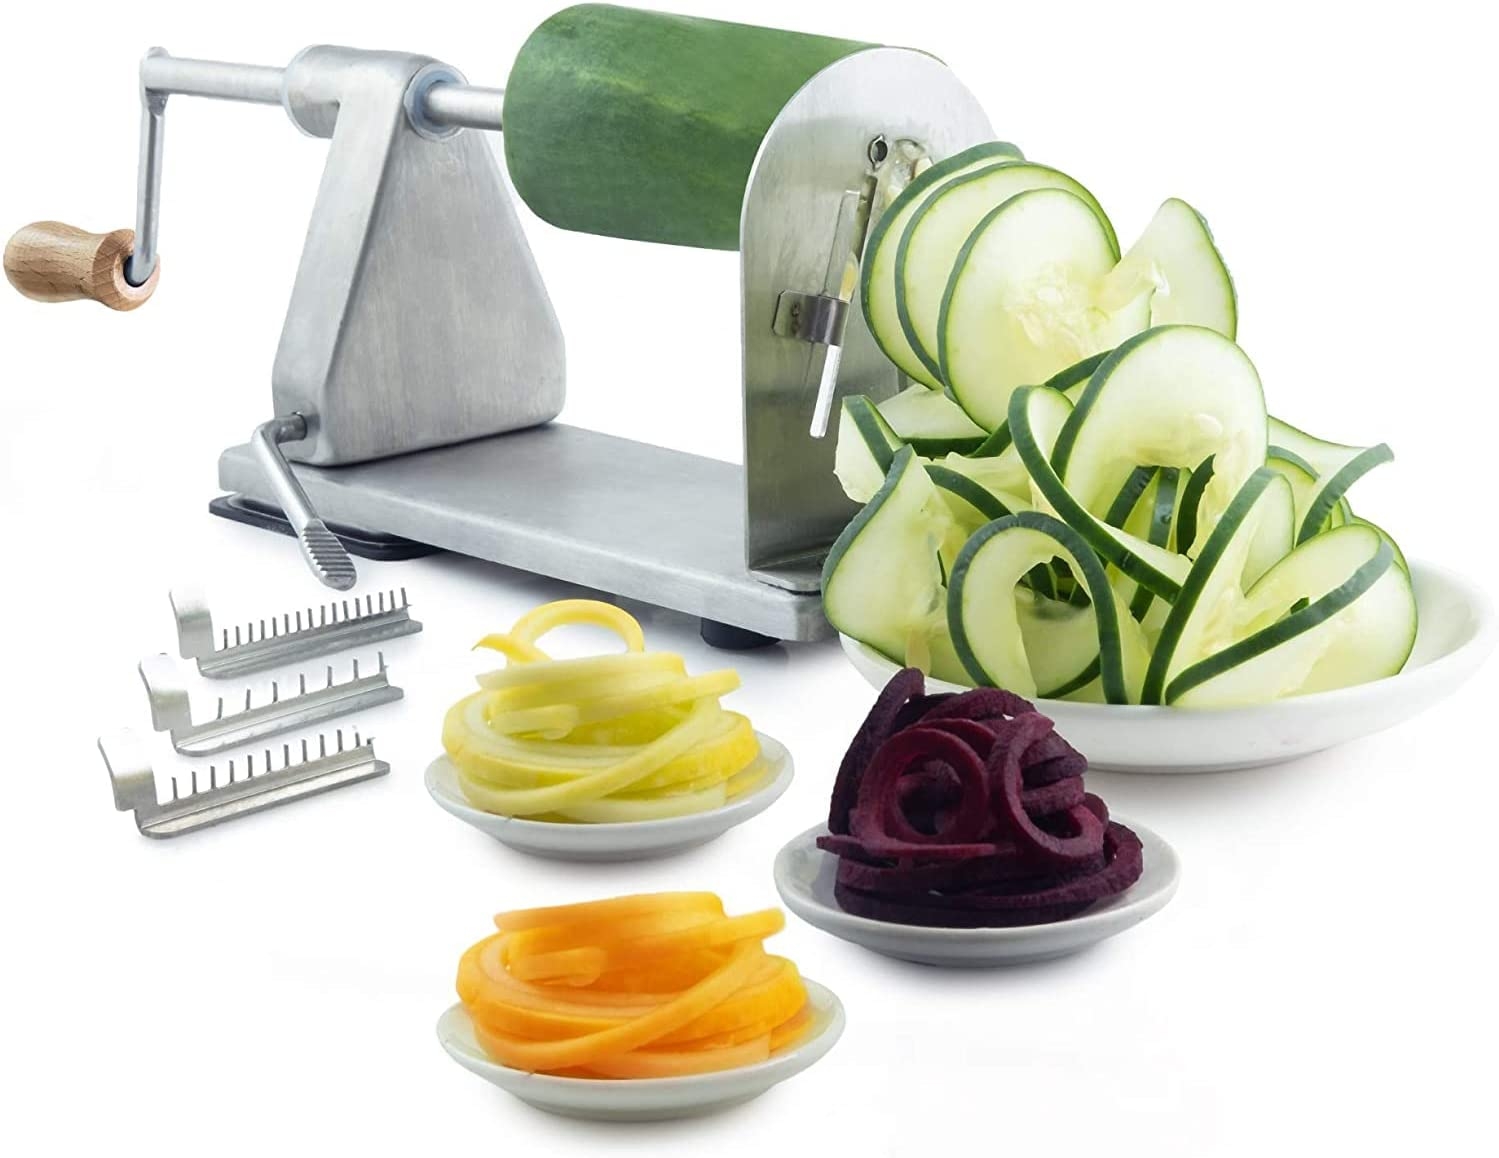 POP Design Stainless Steel Vegetable Spiralizer, Commercial Grade Spiralizer and Potato Cutter for Curly Fries, Noodle Maker and